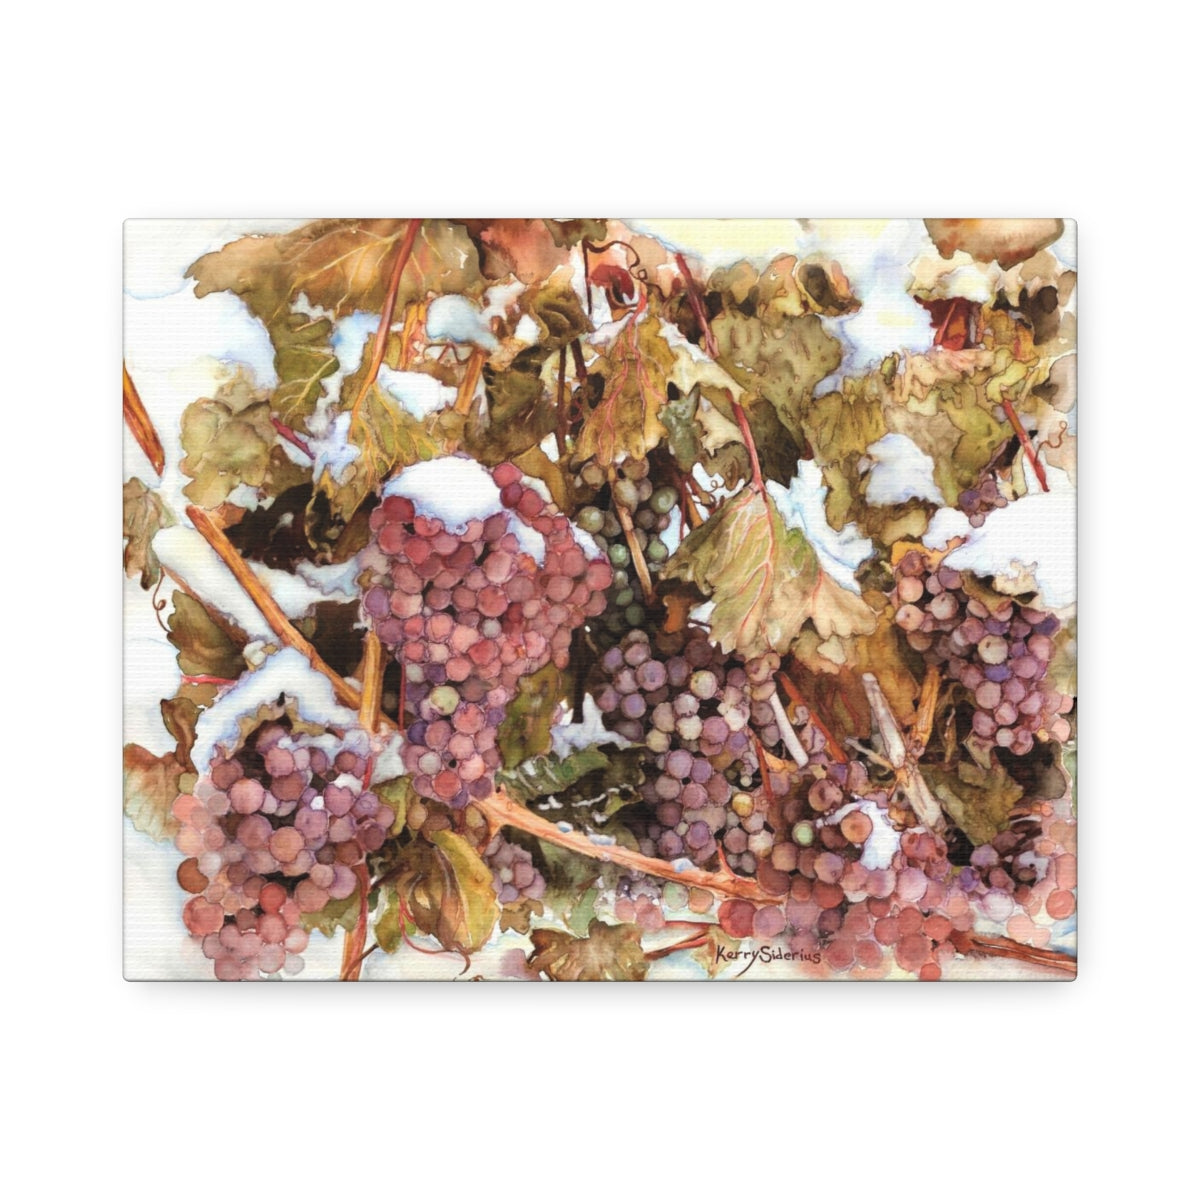 "Snowy Grapes in Chelan" Canvas (6 Sizes Available) - Kerry Siderius Art 